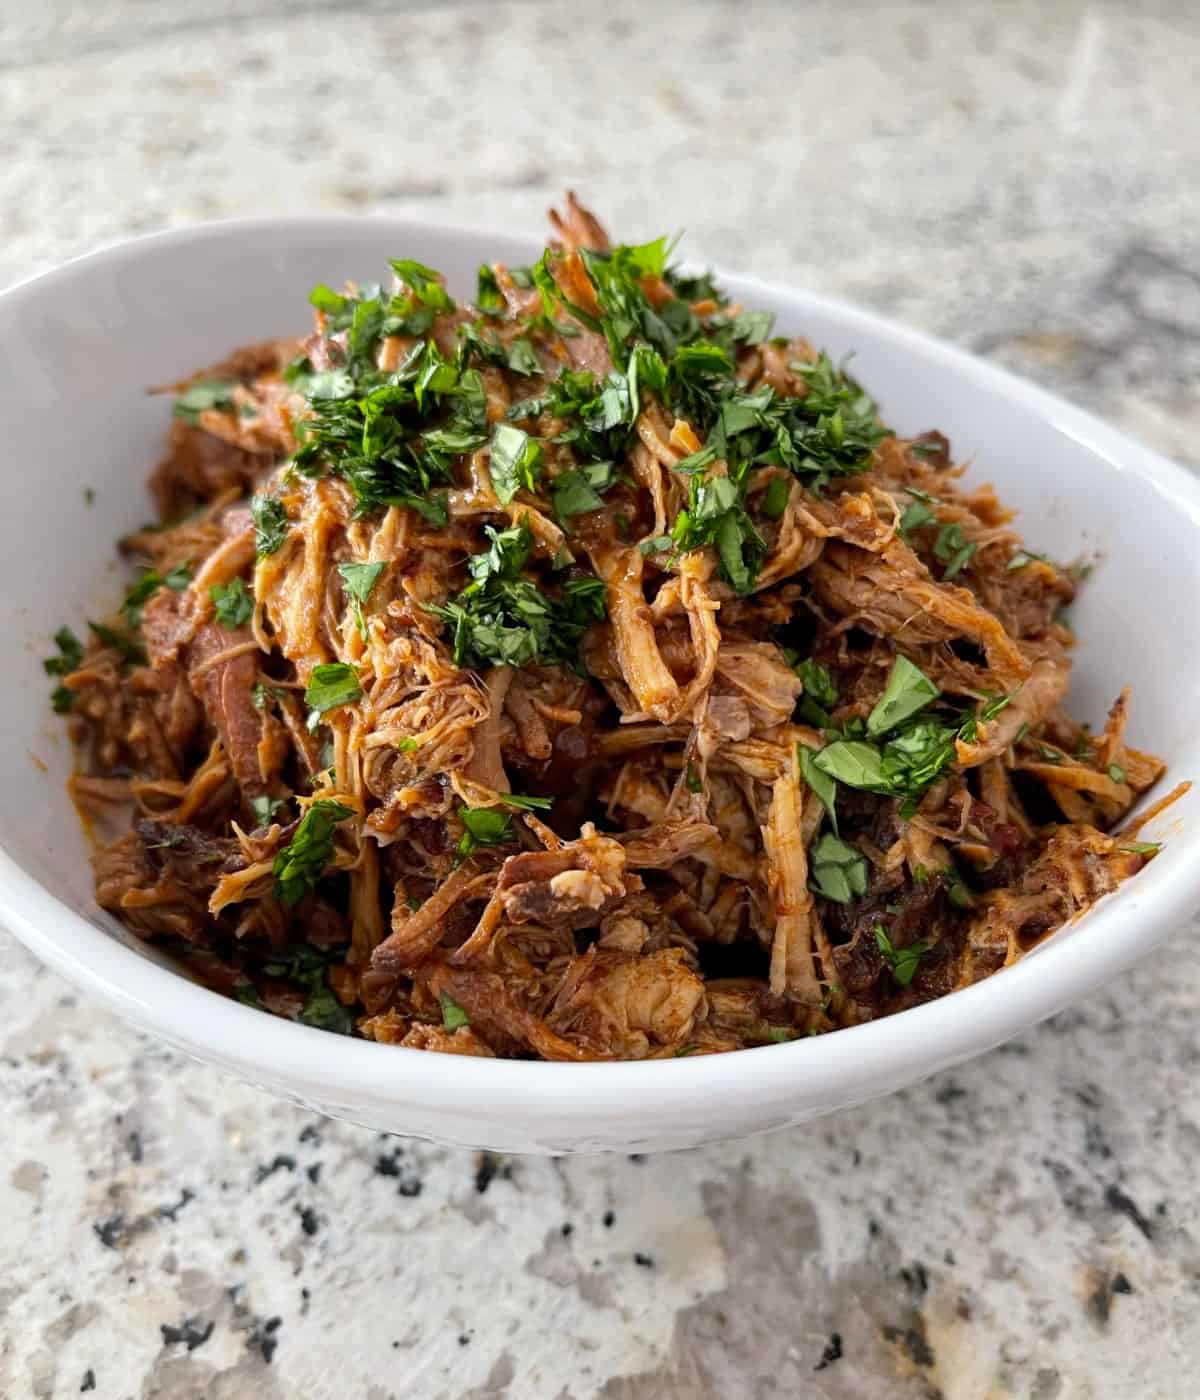 Cherry Chipotle Pulled Pork garnished with chopped cilantro in white serving bowl.